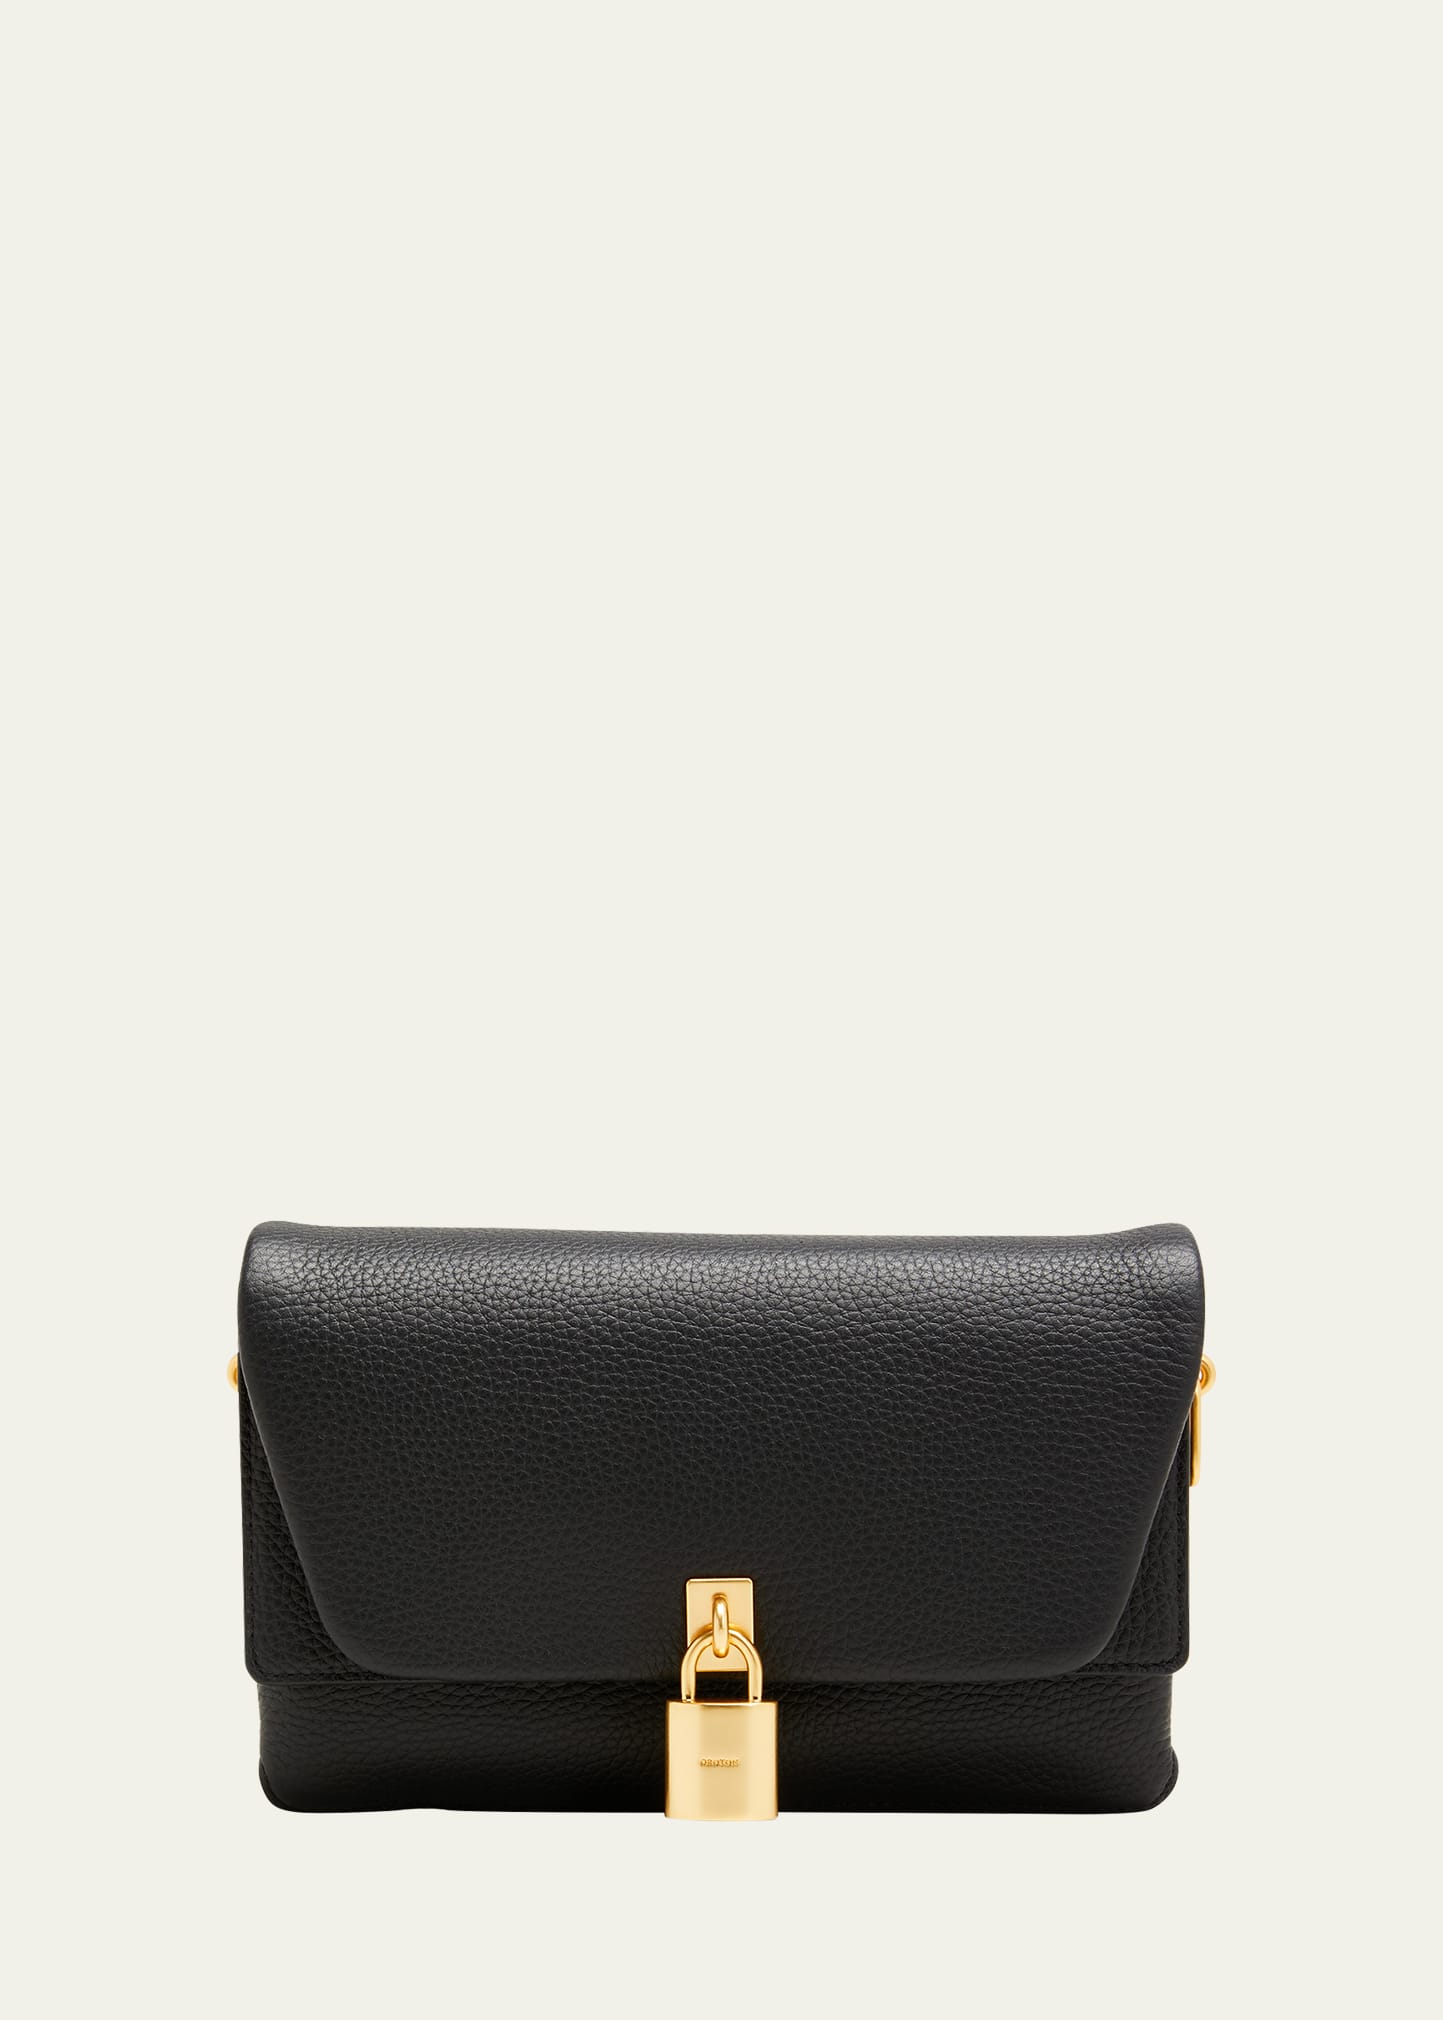 Oroton Tate Small Flap Leather Shoulder Bag In Black